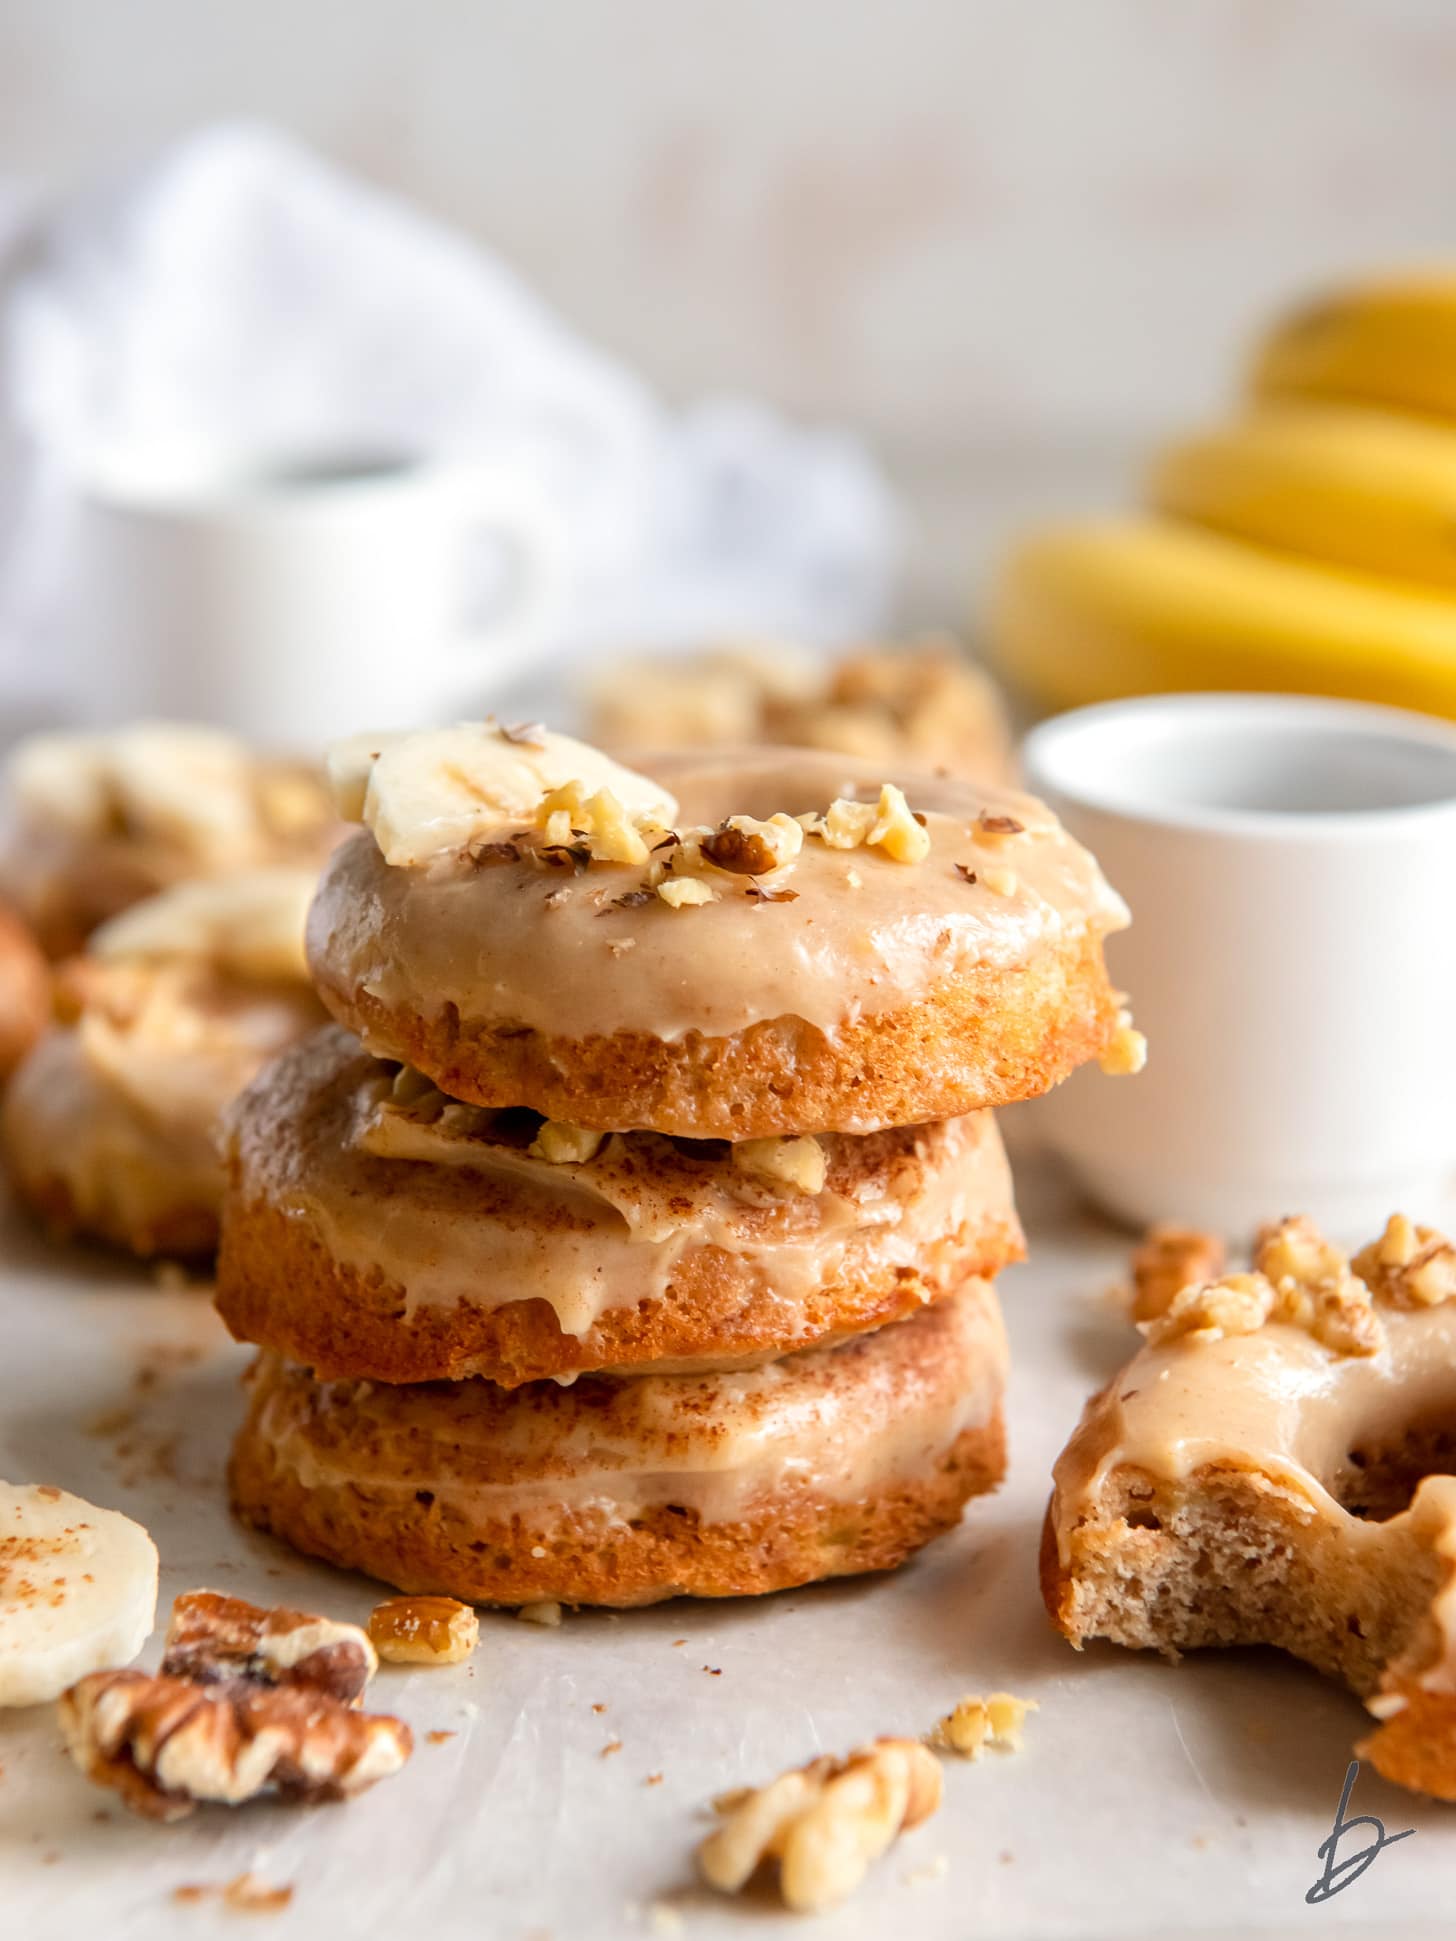 stack of three banana donuts with brown butter glaze and walnuts as garnish.